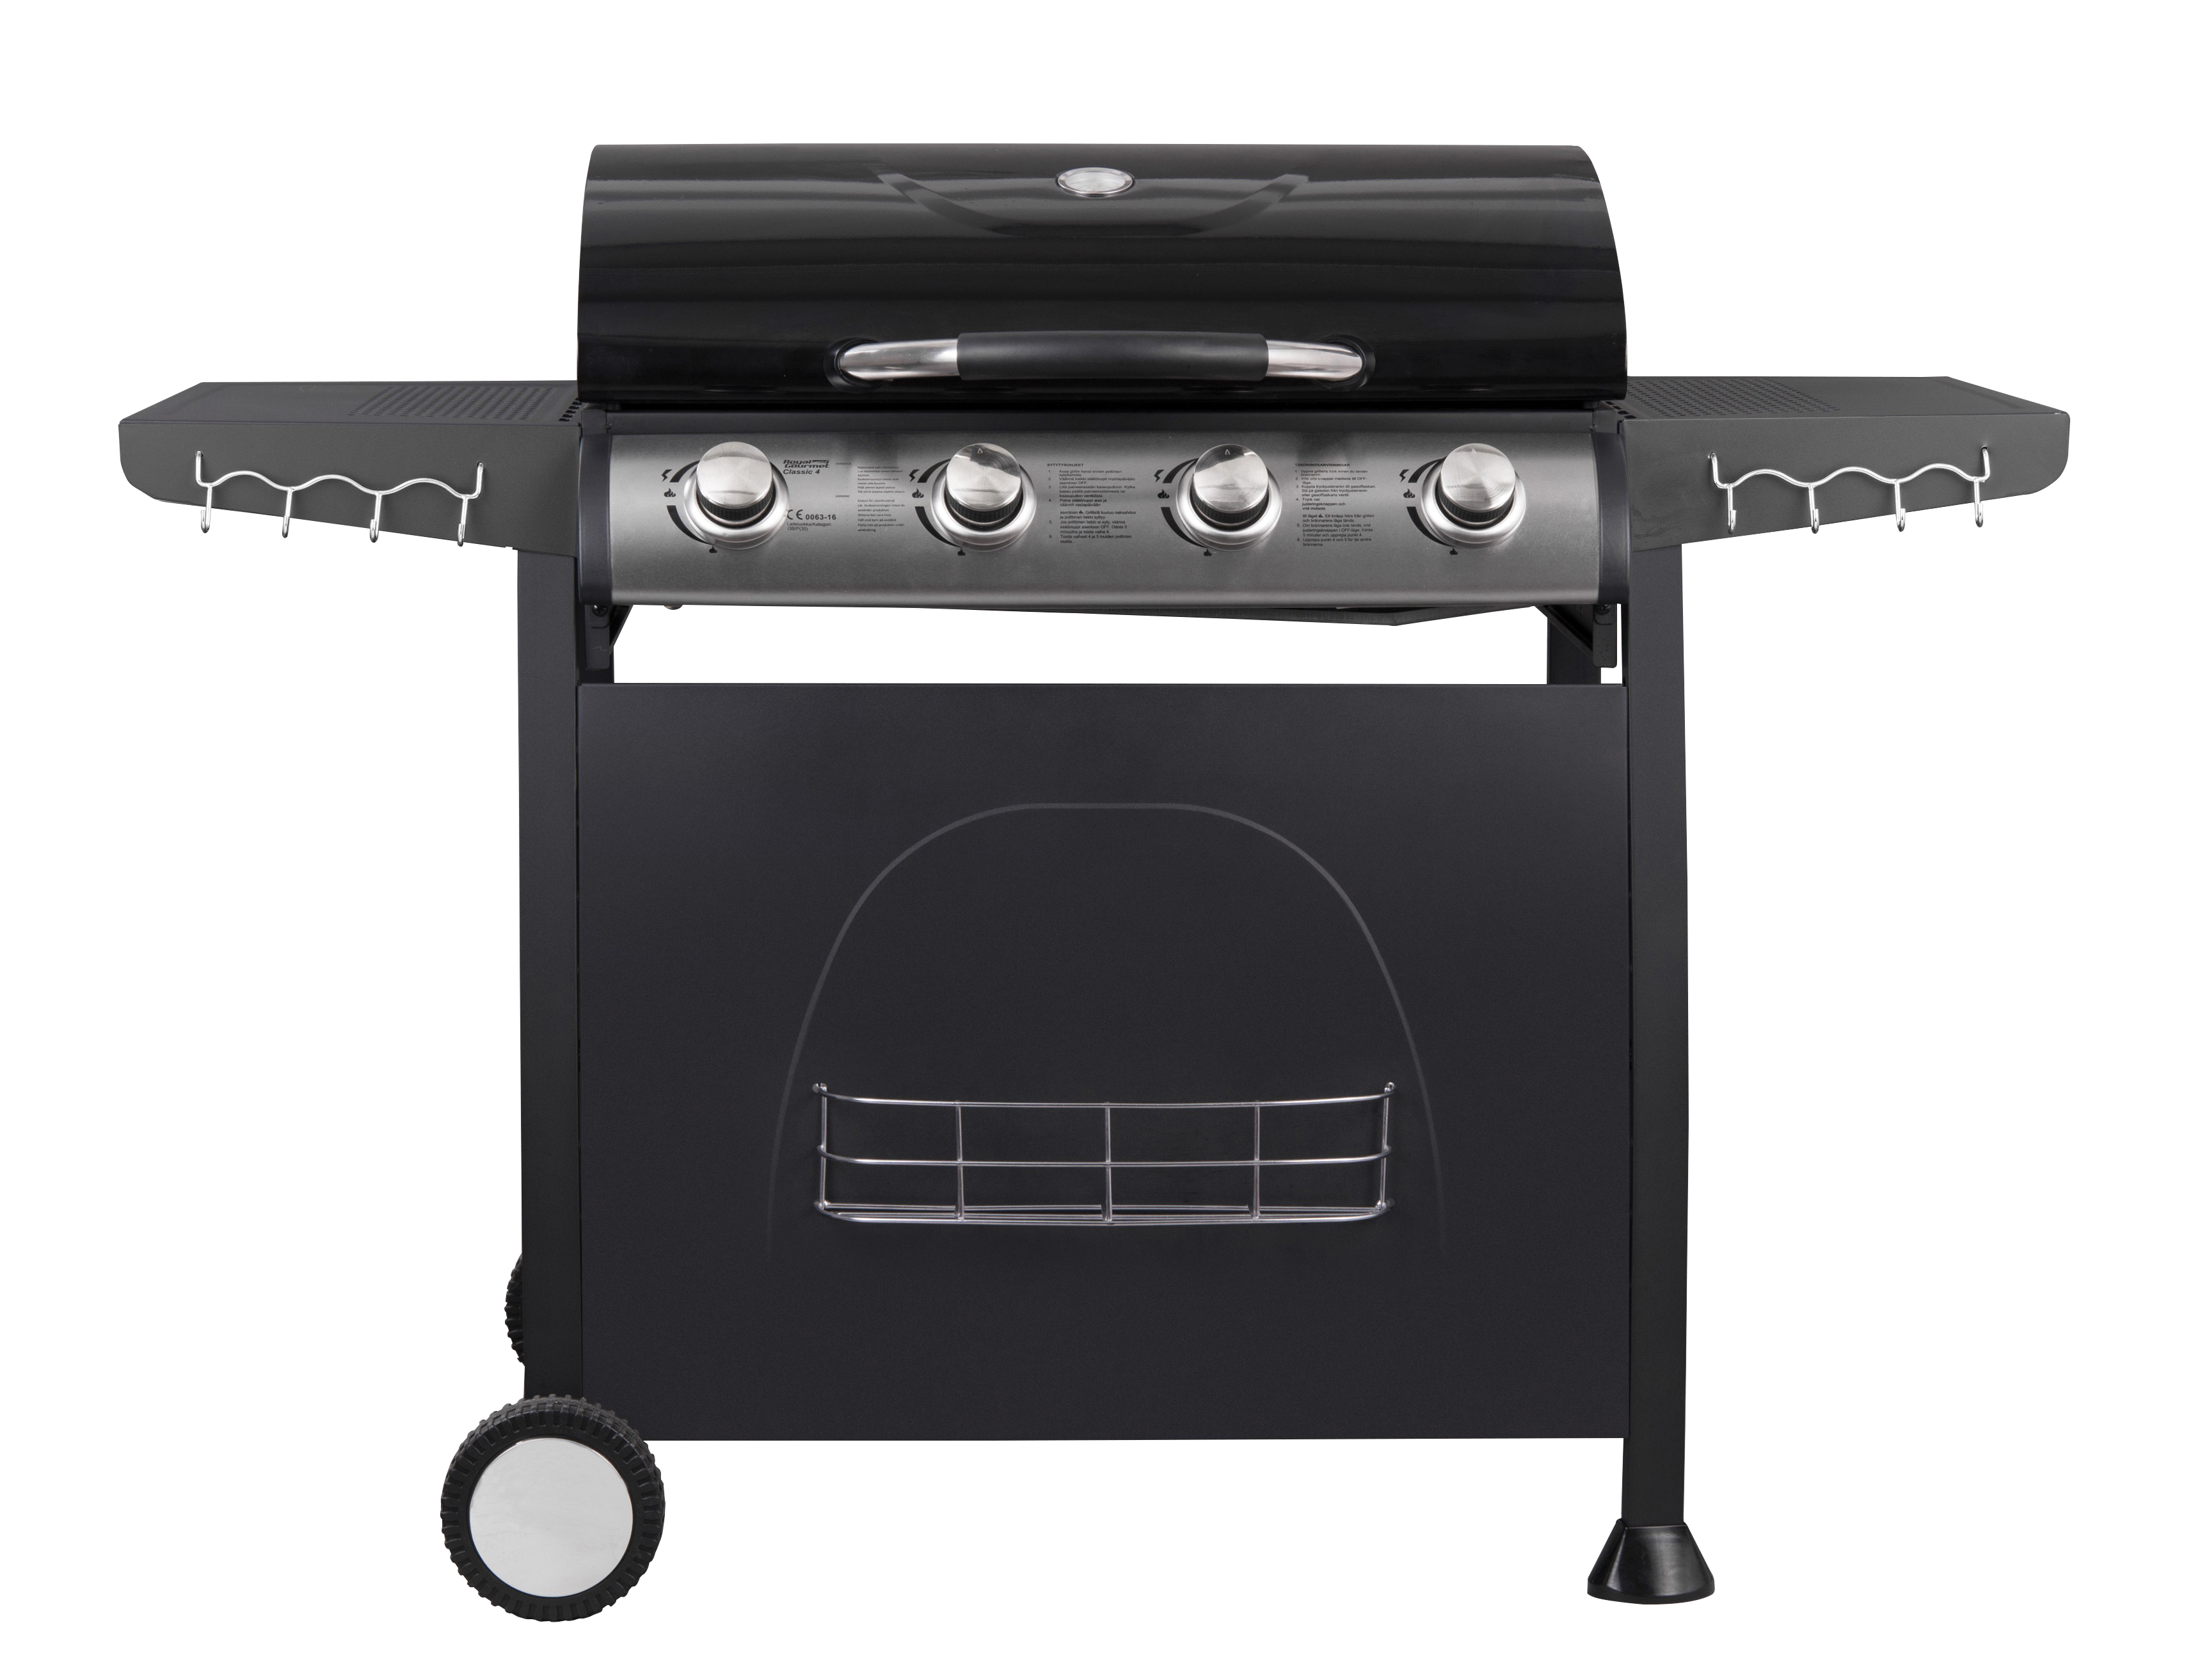 Gas Barbeque Basic with 4 Hobs Unimac